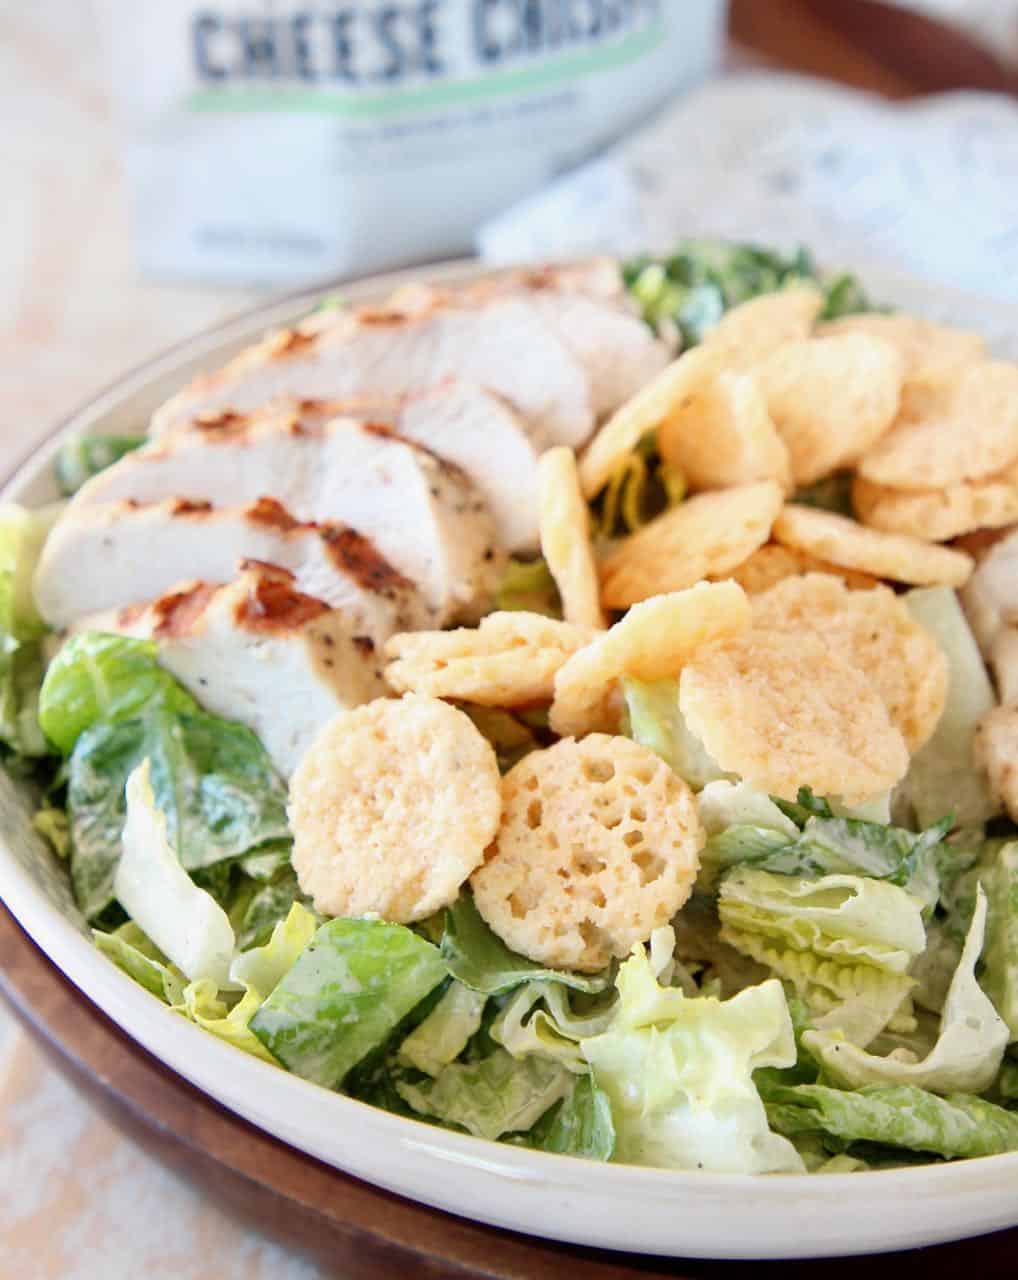 Chicken caesar salad in white bowl topped with parmesan cheese crisps